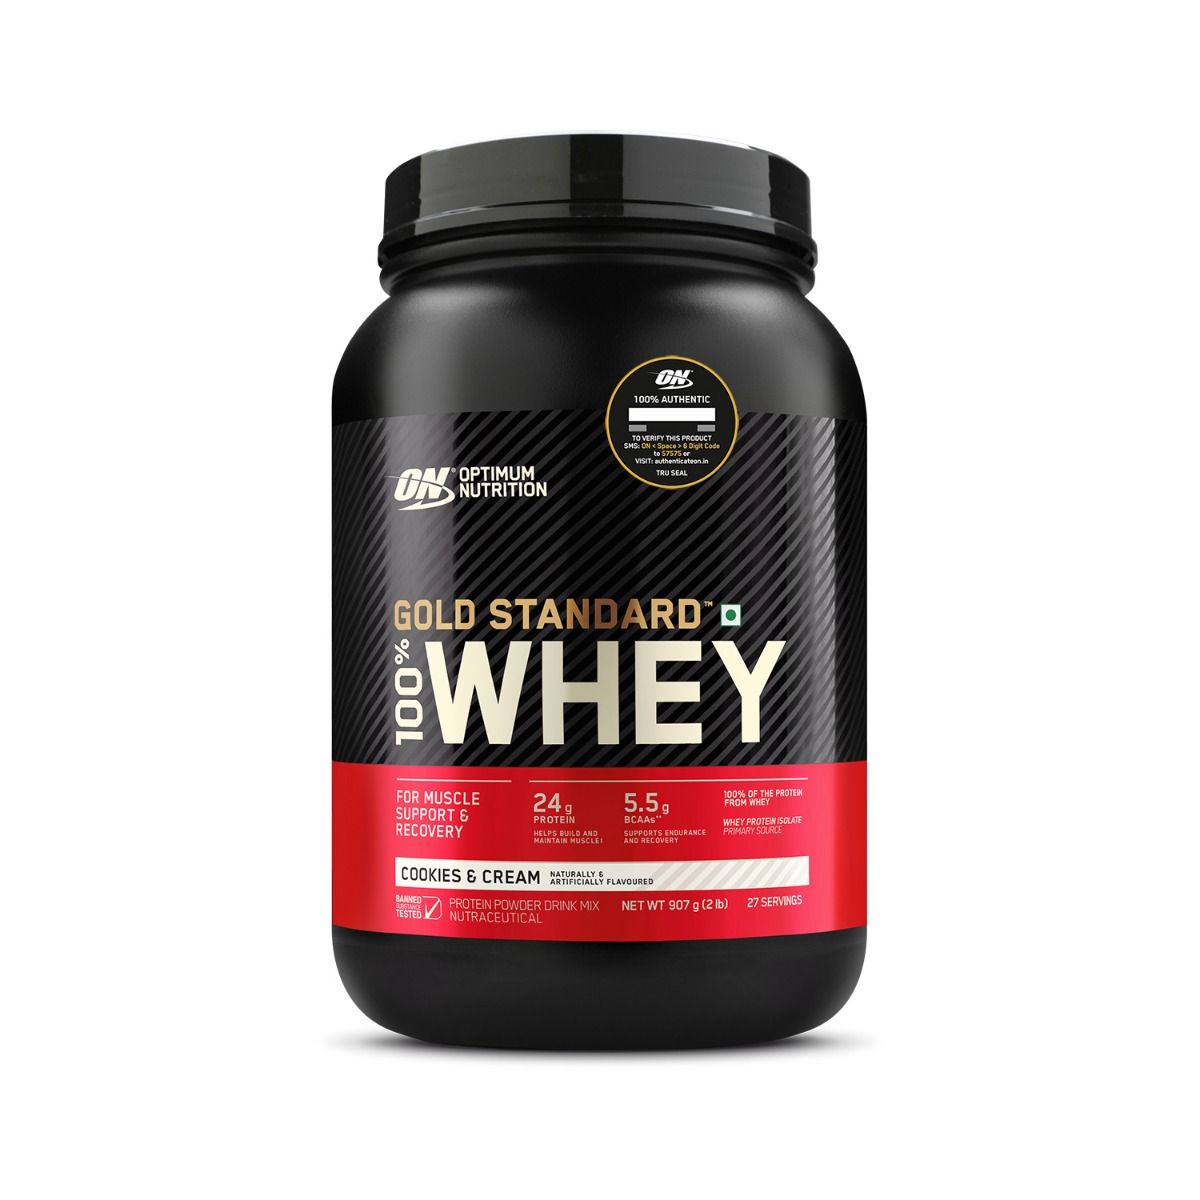 Buy Optimum Nutrition (ON) Gold Standard 100% Whey Protein Cookies & Cream Flavour Powder, 2 lb Online